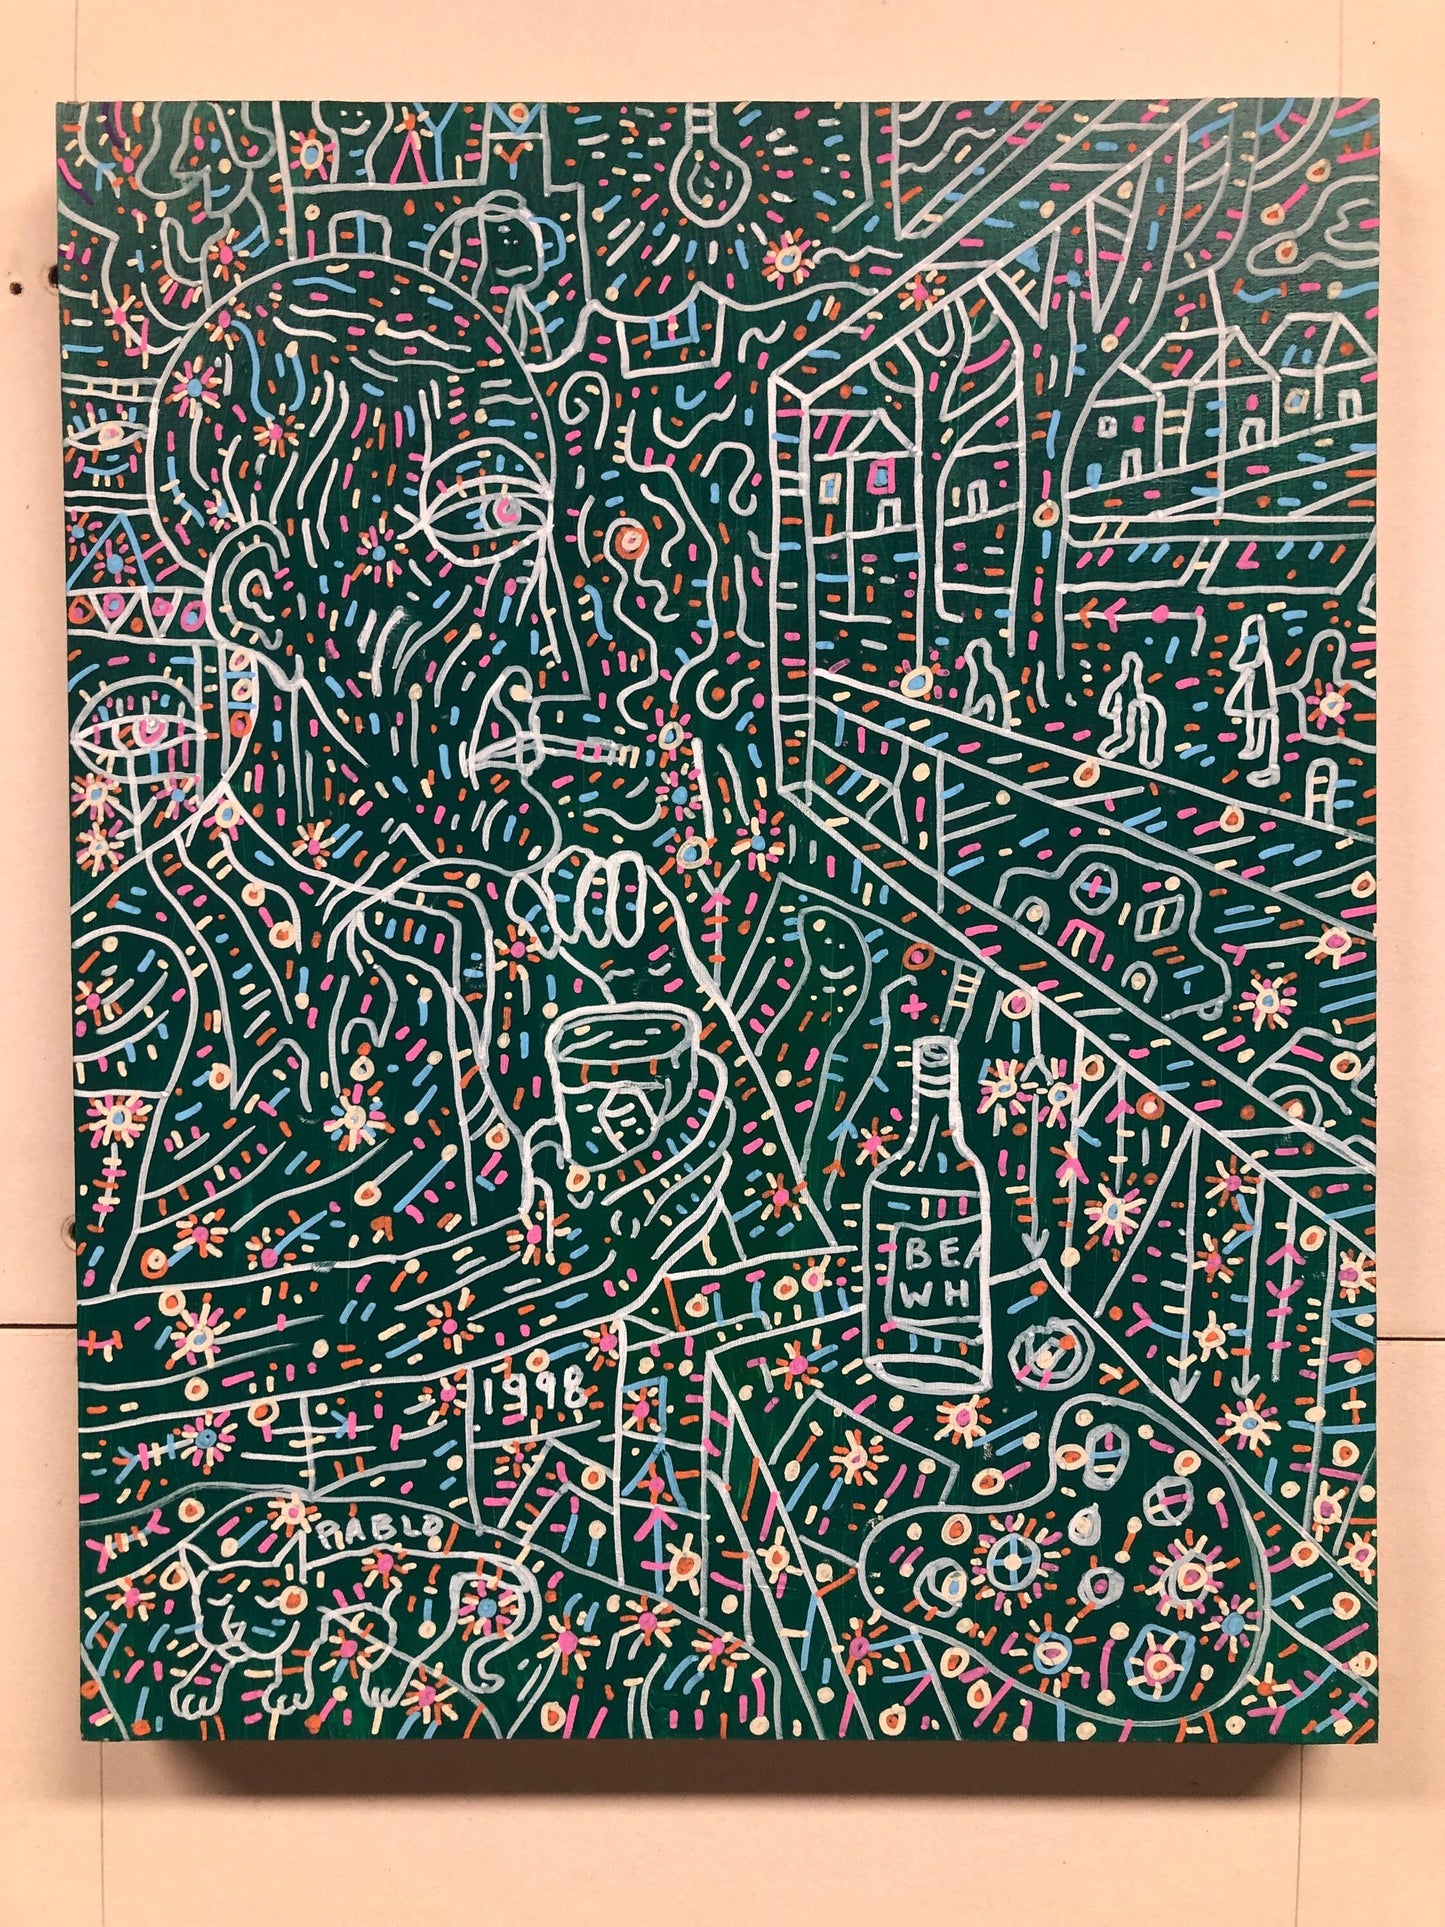 The Year was 1998. Acrylic on wood. 16” x 20”